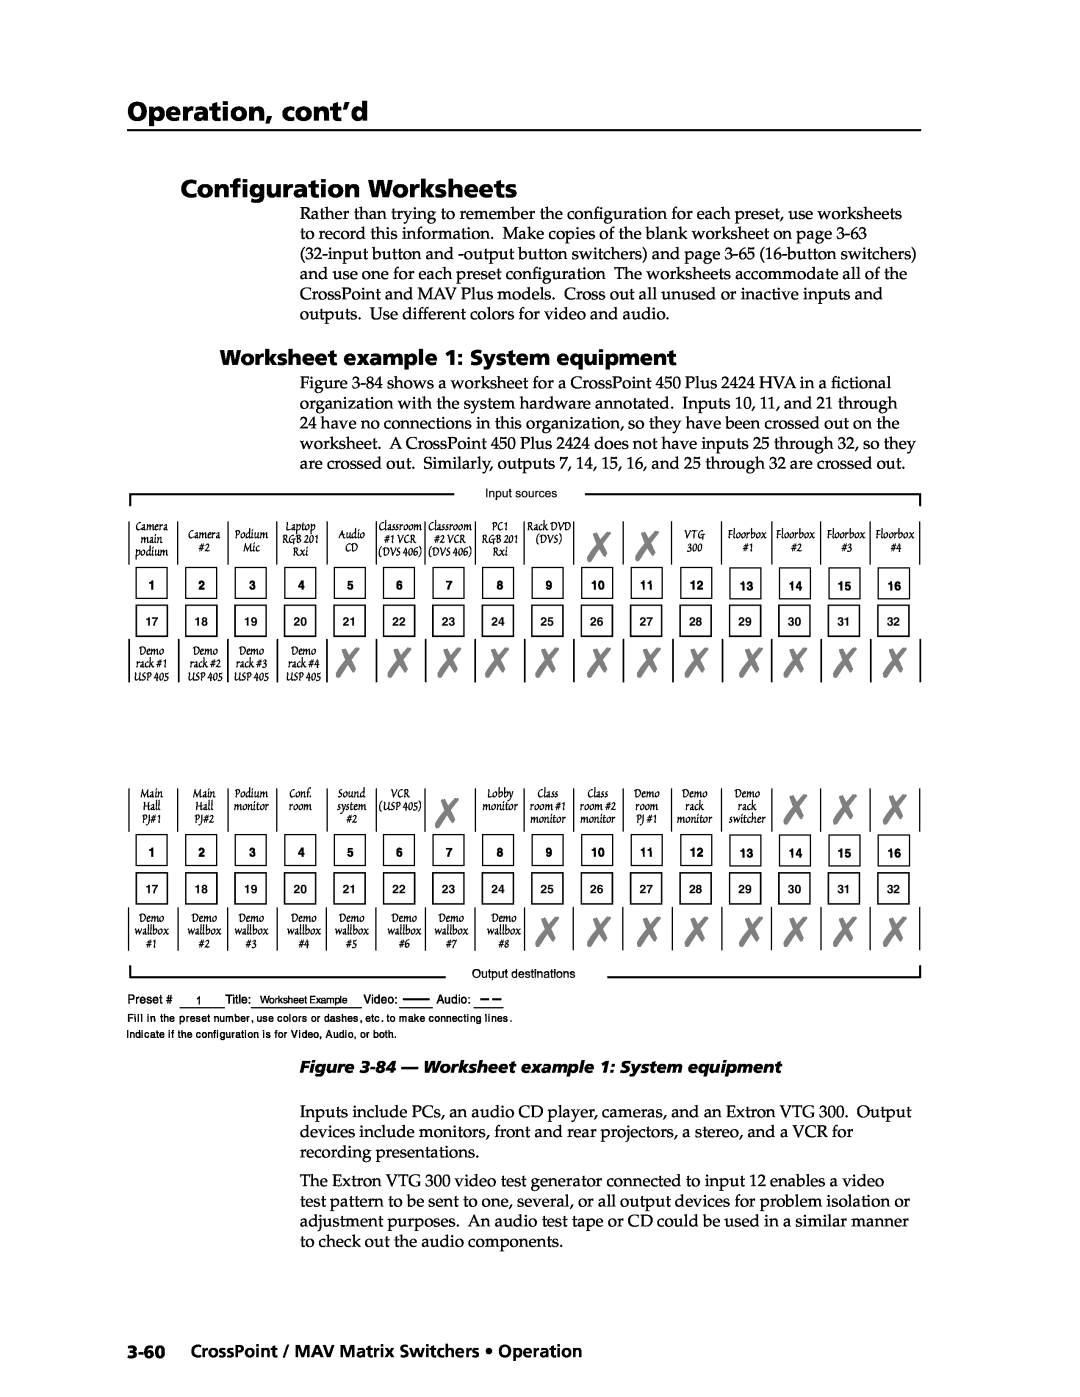 Extron electronic MAV Plus Series manual Configuration Worksheets, Worksheet example 1 System equipment, Operation, cont’d 